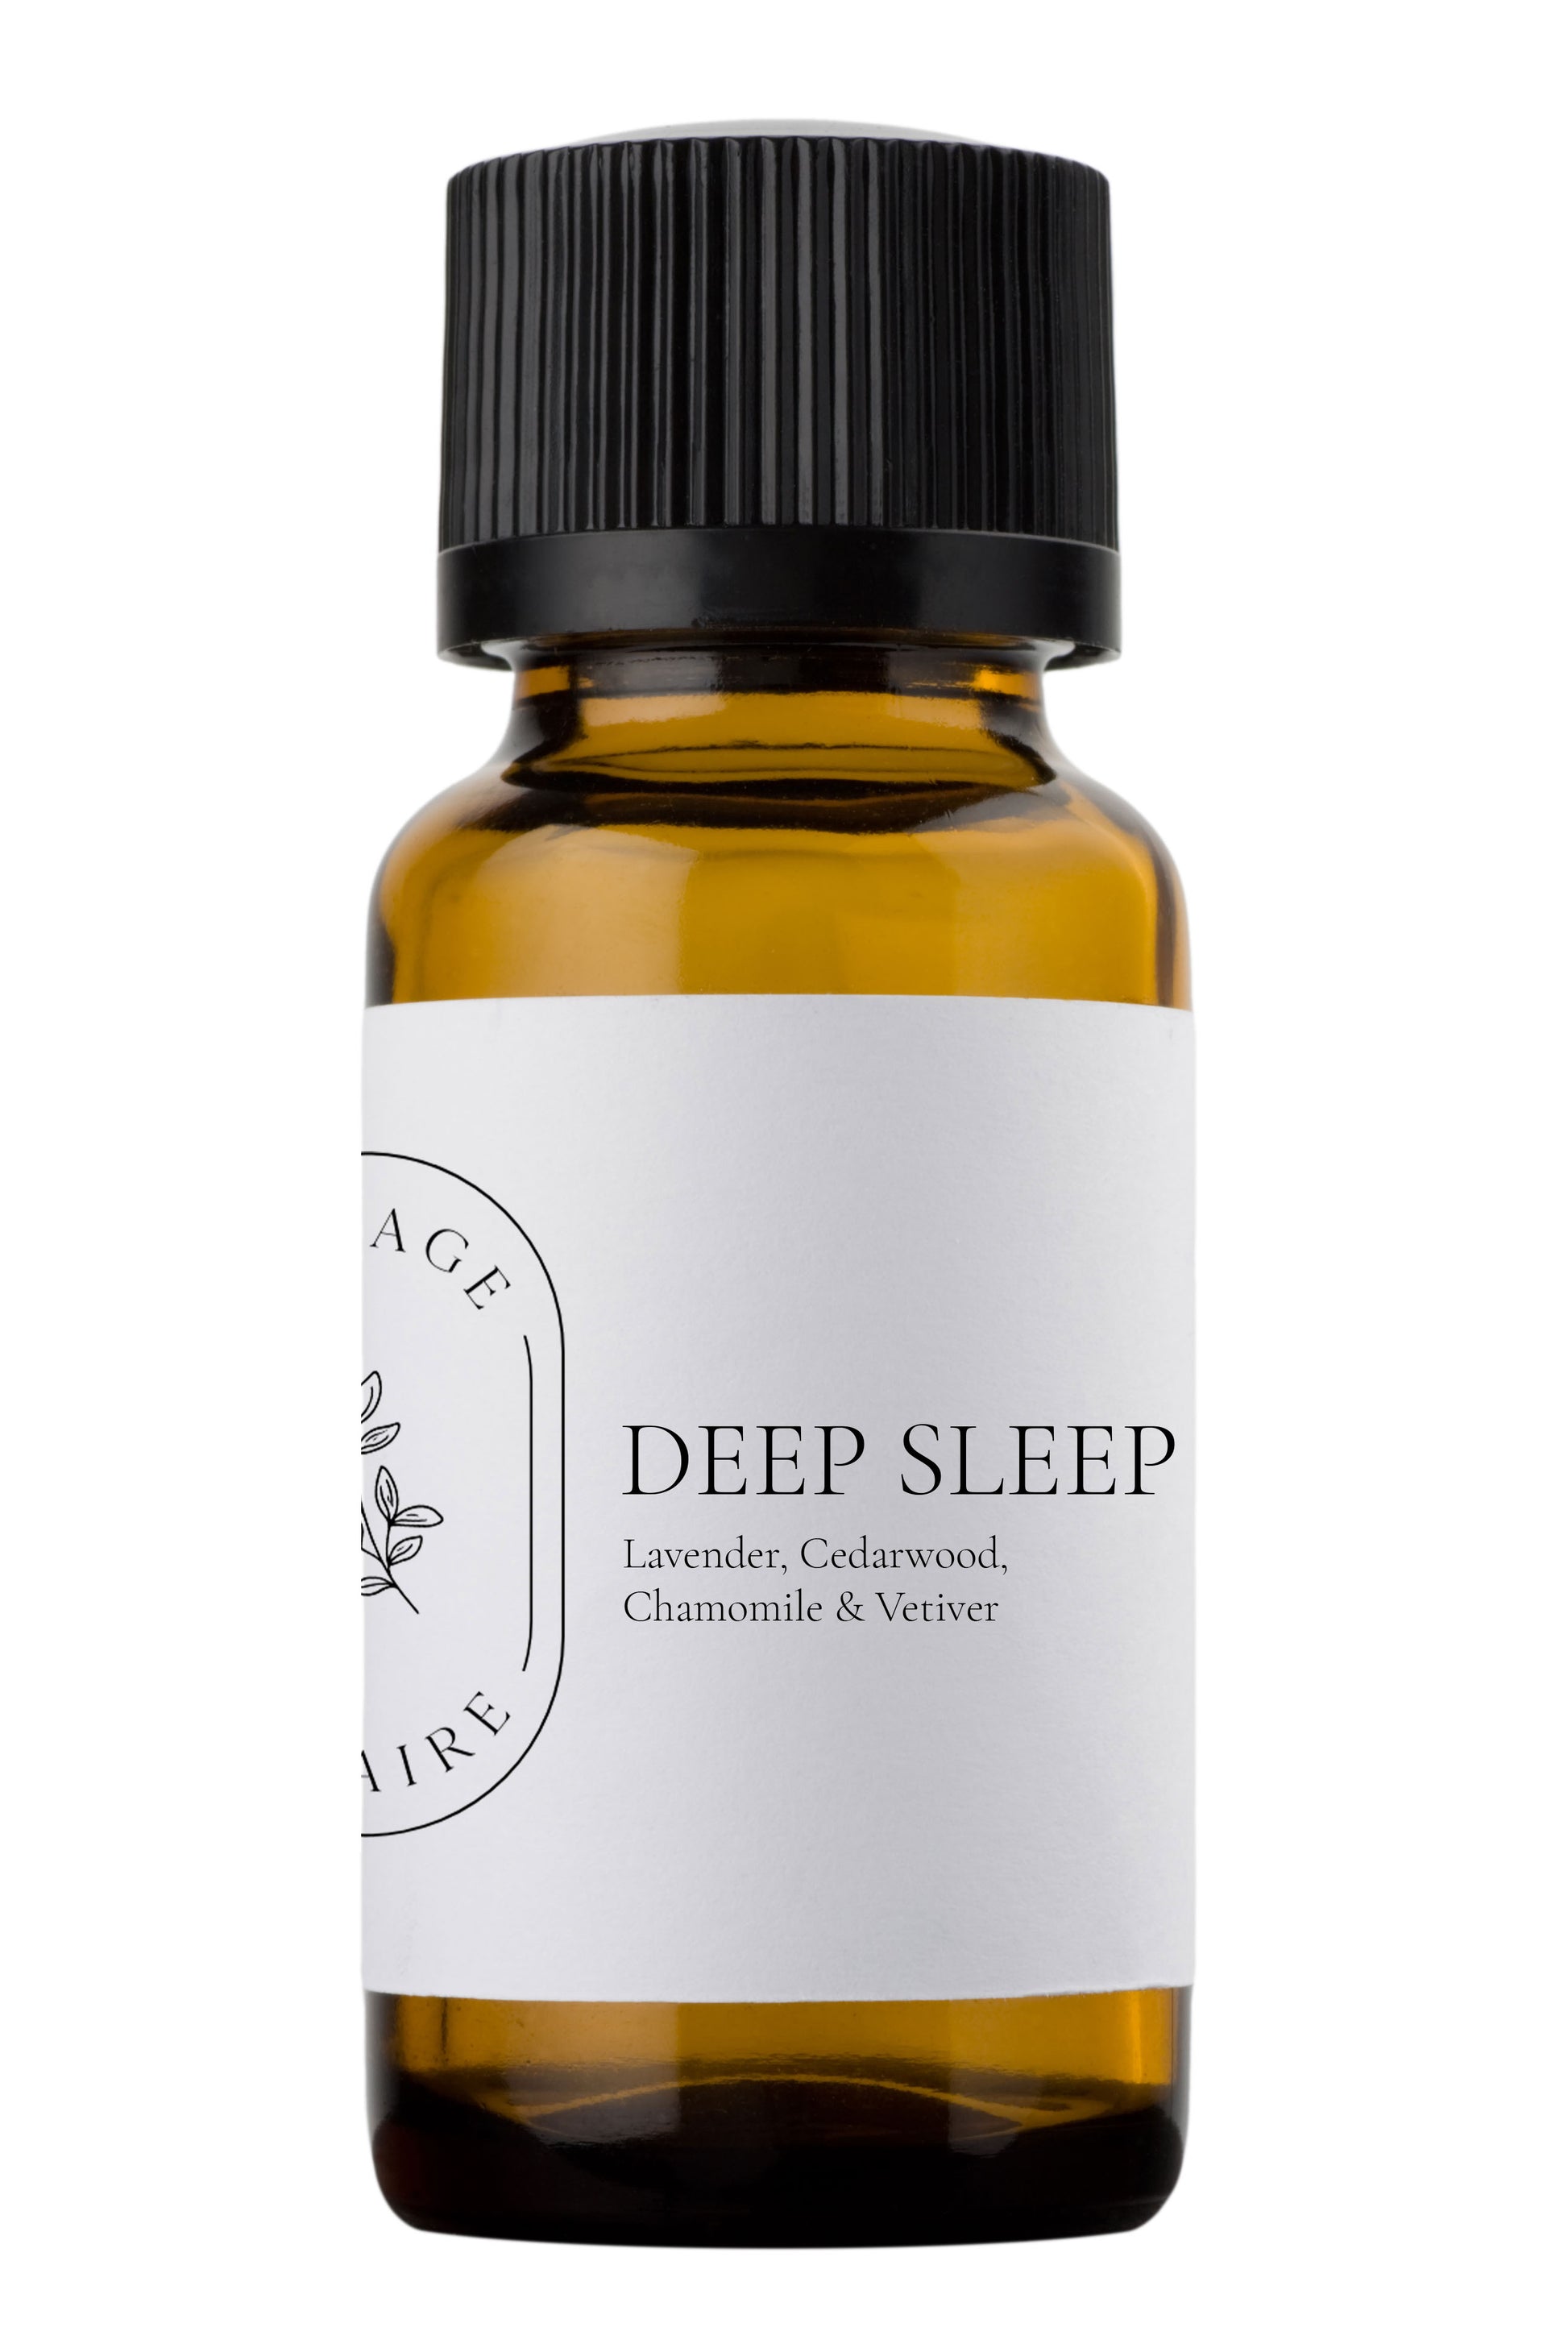 Our Deep Sleep Essential Oil Roll-On Blend is a carefully curated blend of essential oils designed to help you unwind and experience blissful nights of restorative sleep.